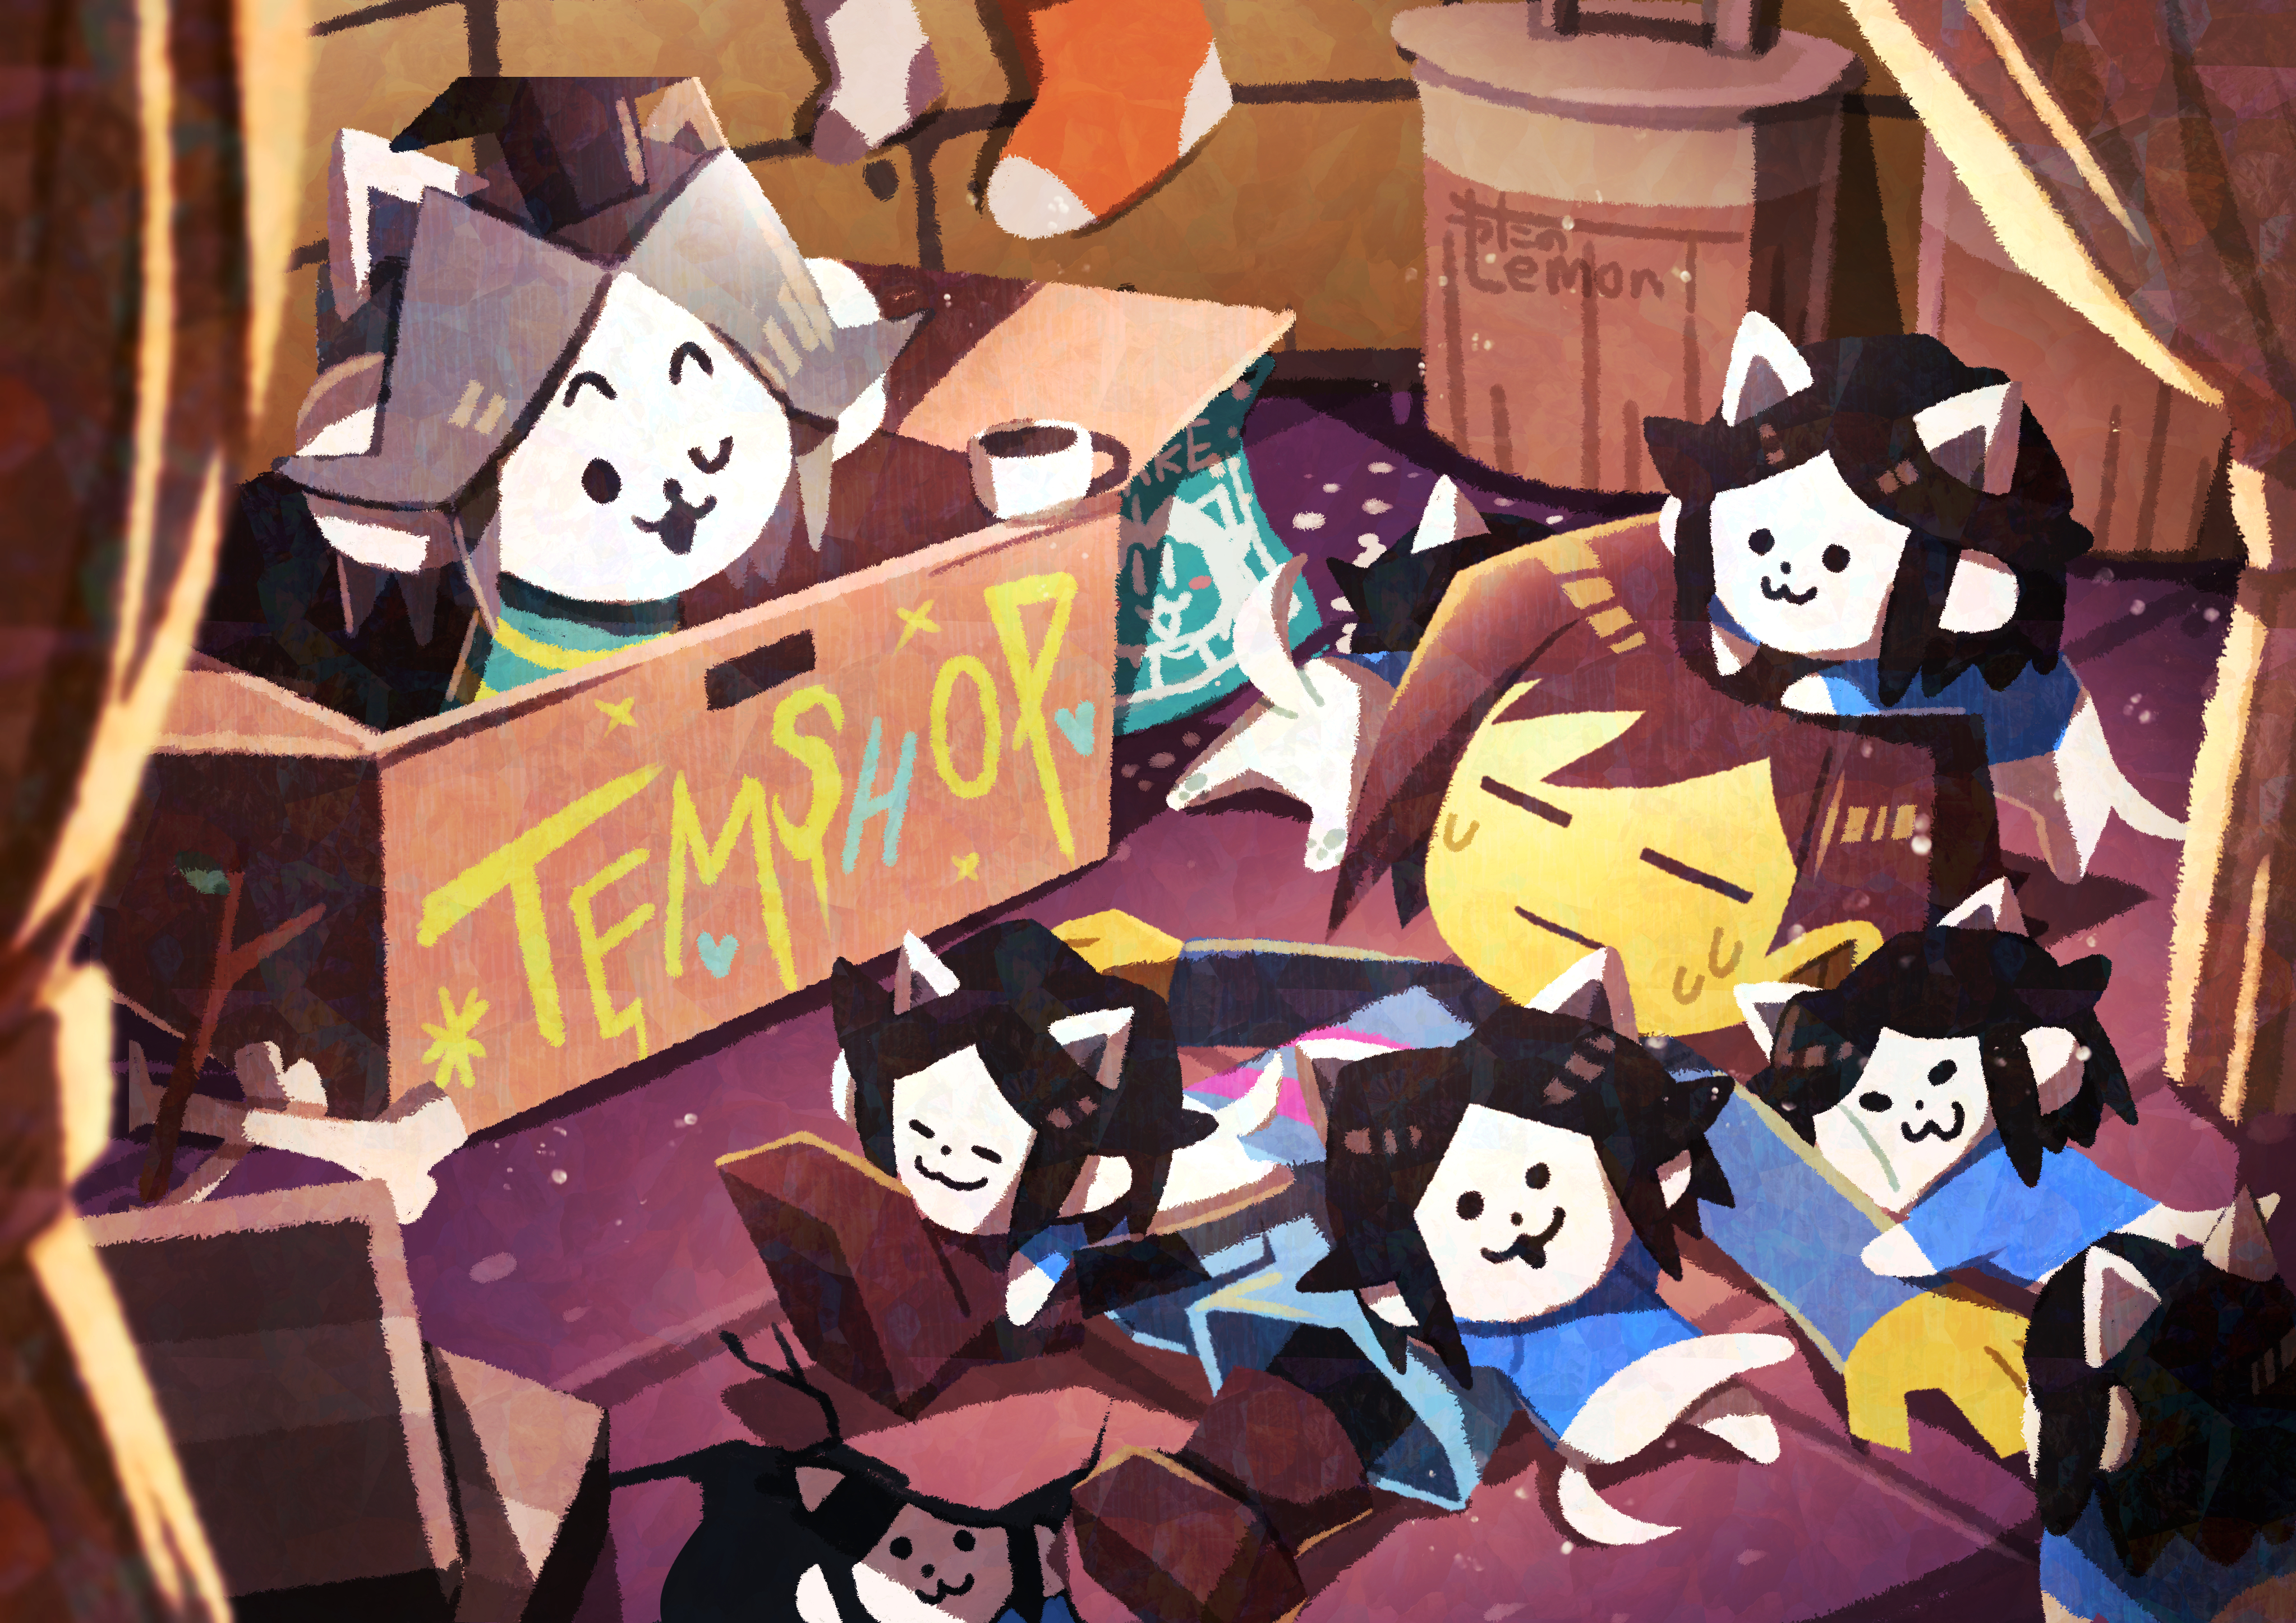 beatrice gross recommends images of temmie from undertale pic